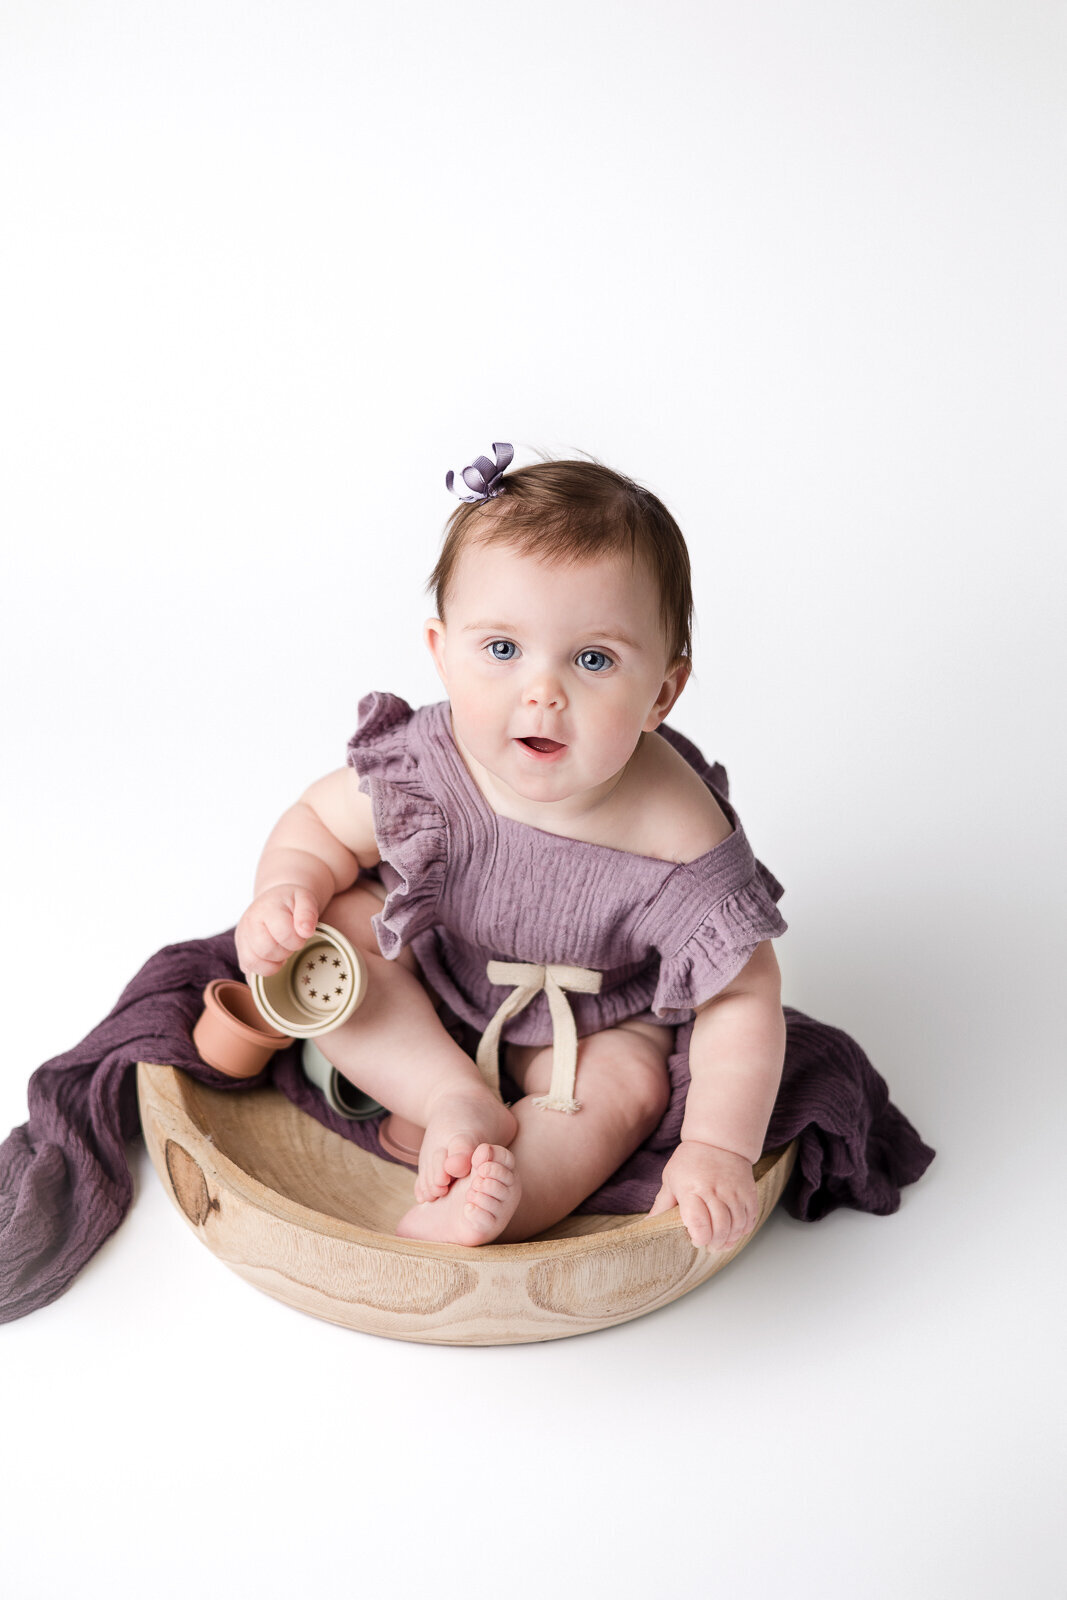 in-home_milestone_photography_session_9_month_old_sitter_session_Frankfort_KY_photographer